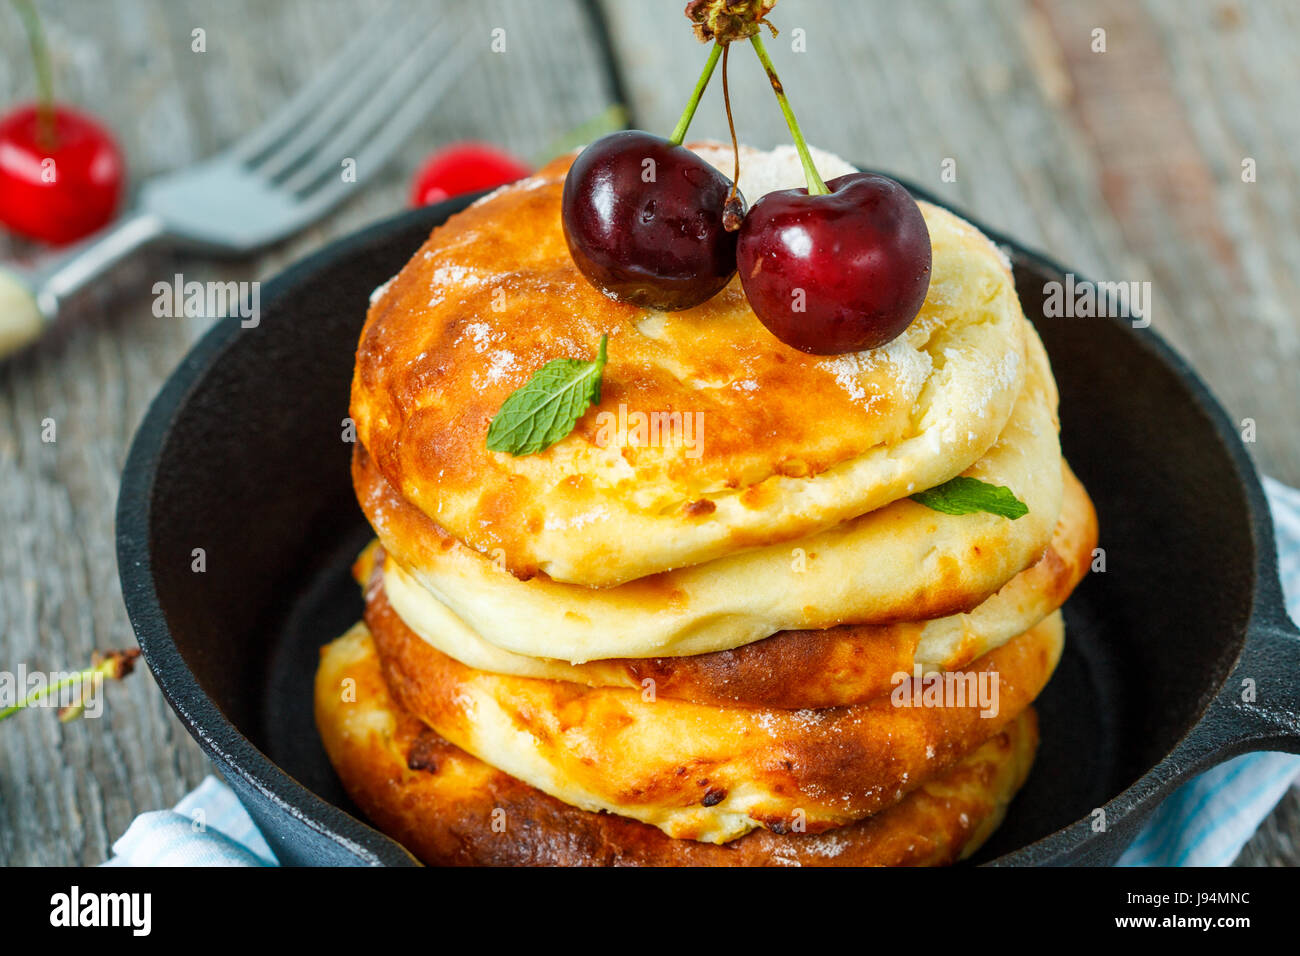 Homemade Cottage Cheese Pancakes With Cherries In A Cast Iron